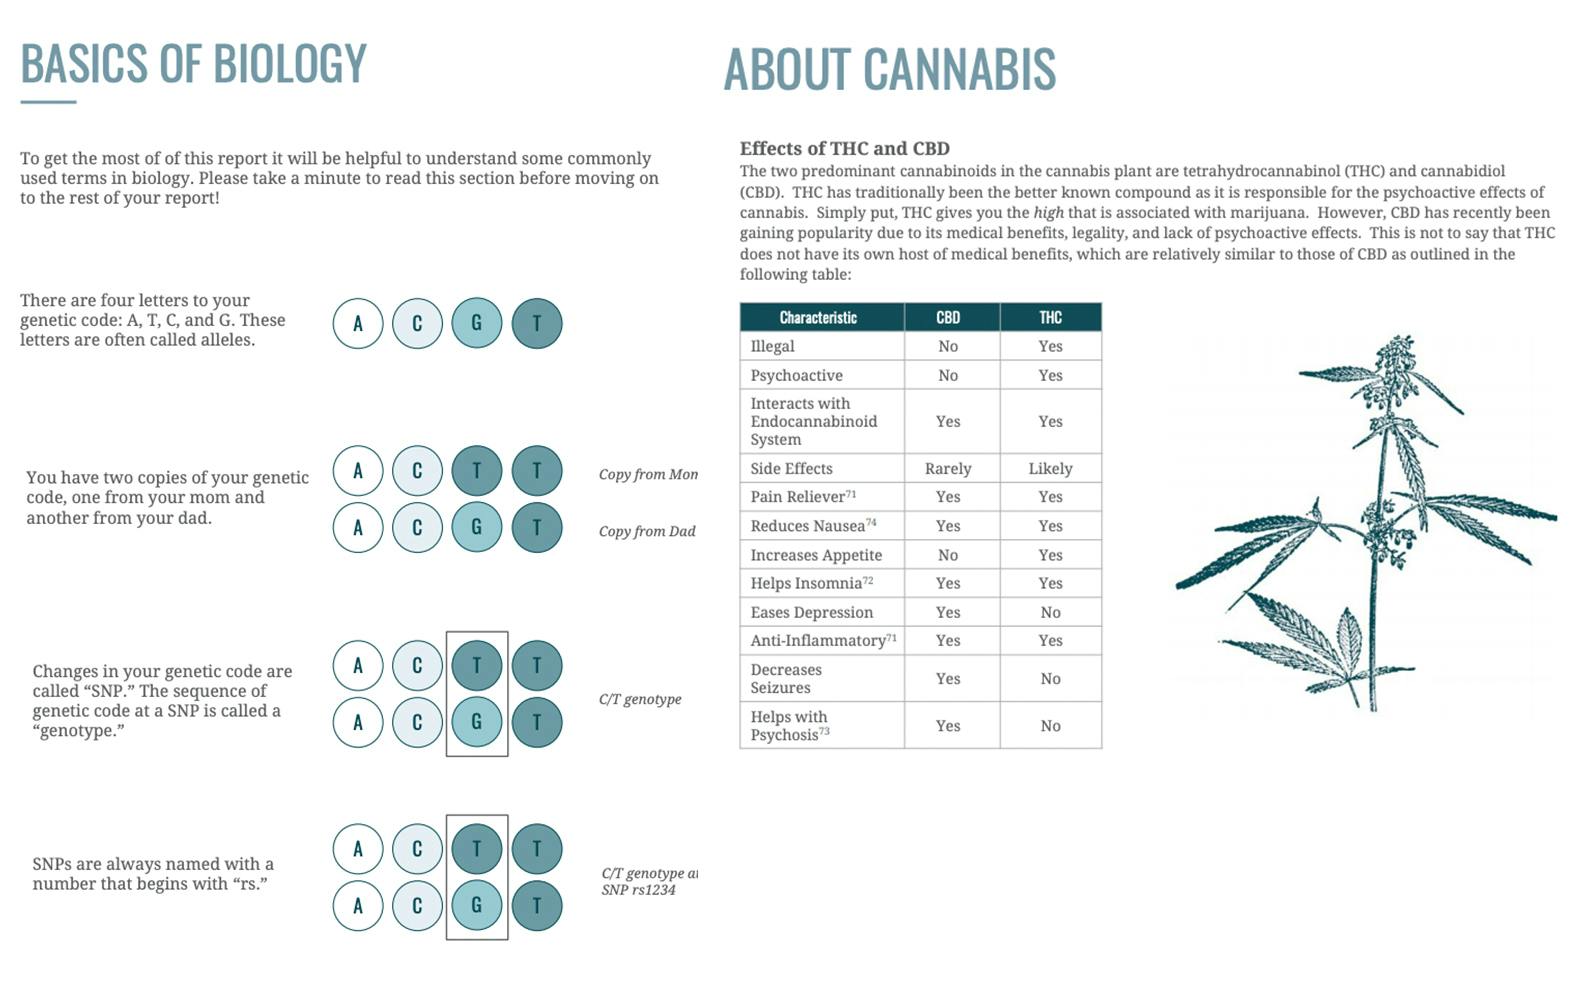 Dynamic DNA Laboratories' explanation of using and understanding pharmacogenetics as it relates to cannabis products.